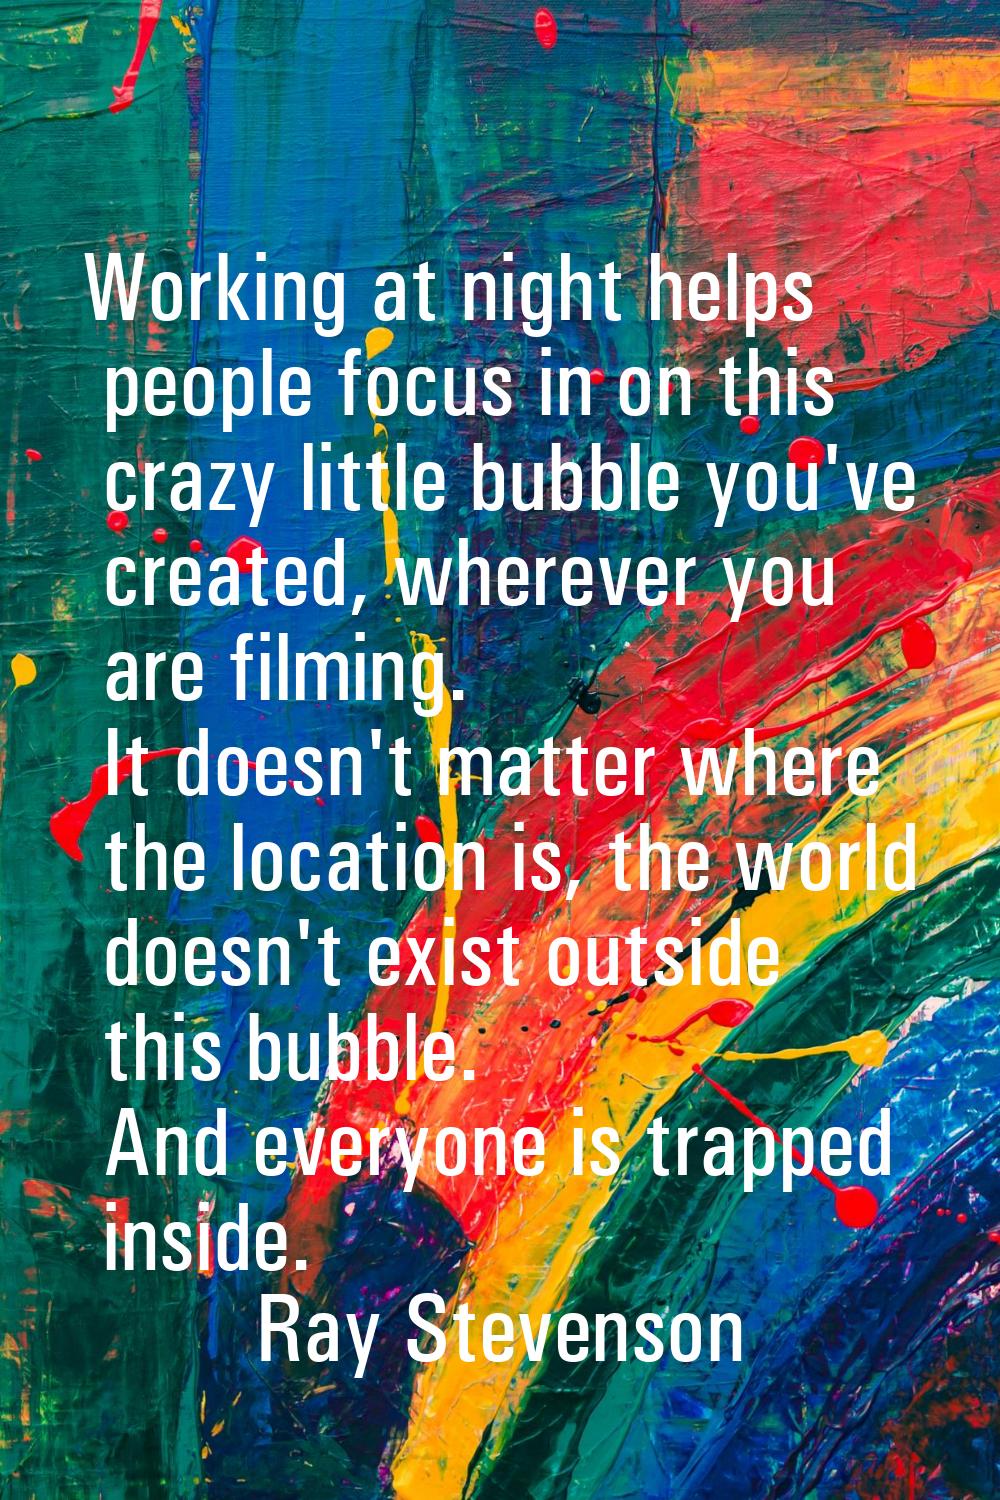 Working at night helps people focus in on this crazy little bubble you've created, wherever you are